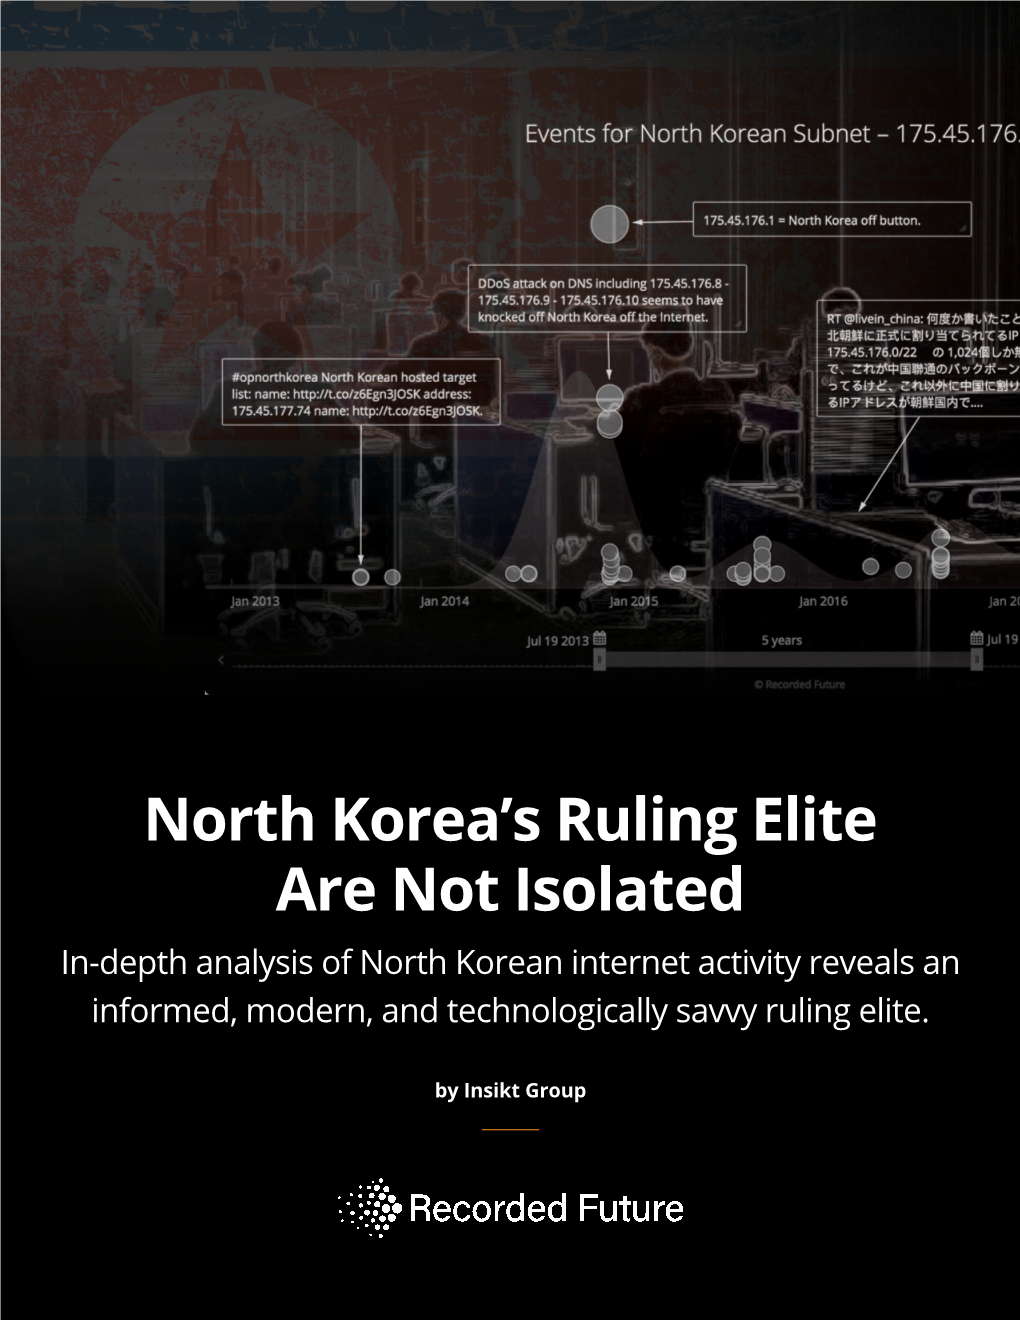 North Korea's Ruling Elite Are Not Isolated